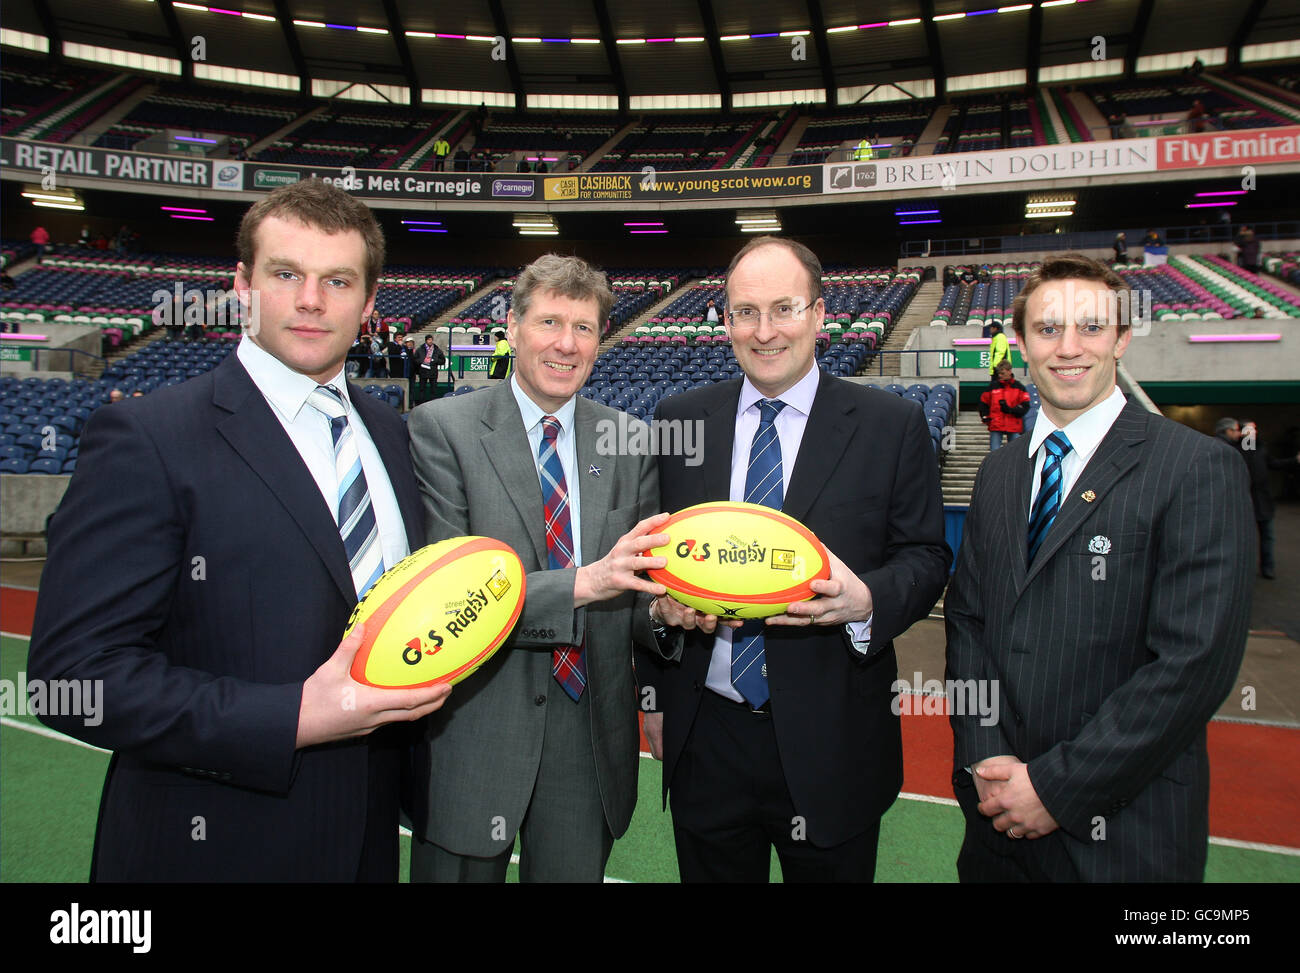 Scotland's Geoff Cross (far left) and Mike Blair (far right) join their country's Justice Secretary Kenny MacAskill (centre left) and SRU Chief Executive Gordon McKie (centre right) to promote CashBack for Communities Initative. Stock Photo